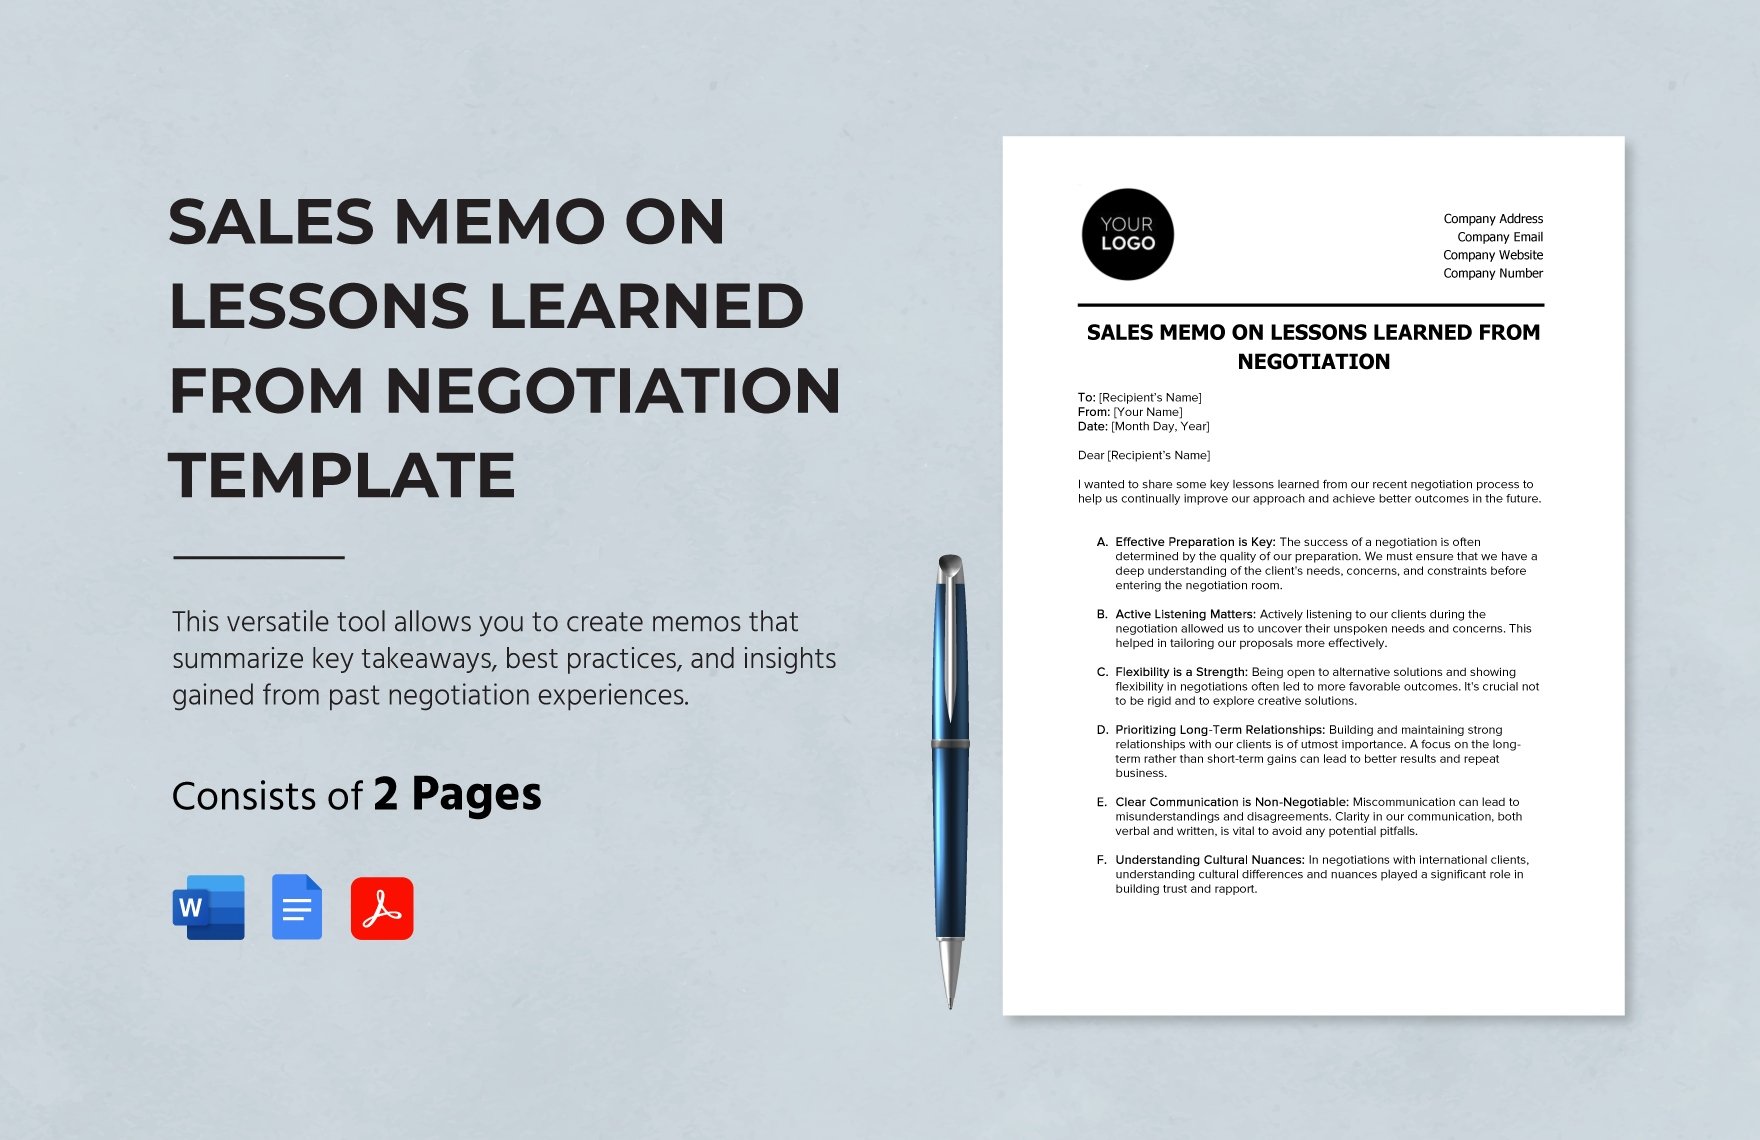 Sales Memo on Lessons Learned from Negotiation Template